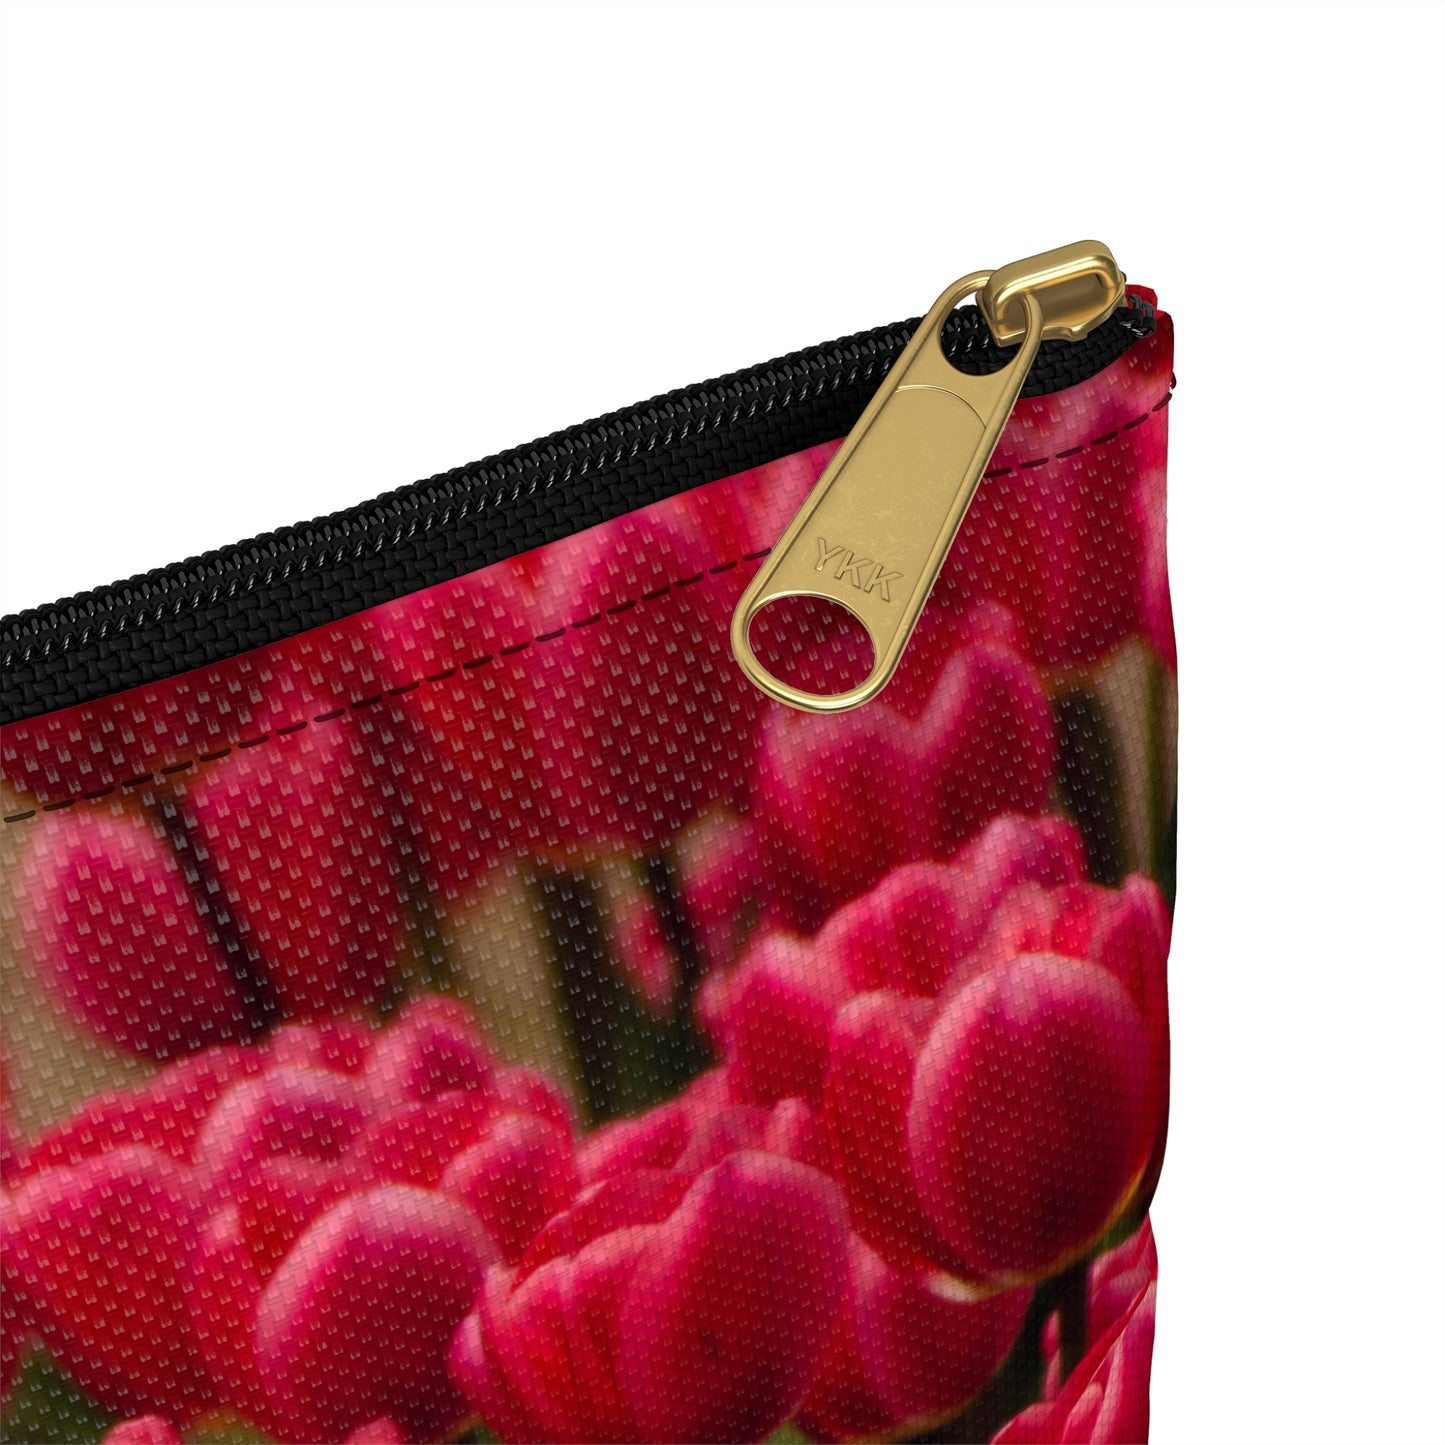 Flowers 14 Accessory Pouch